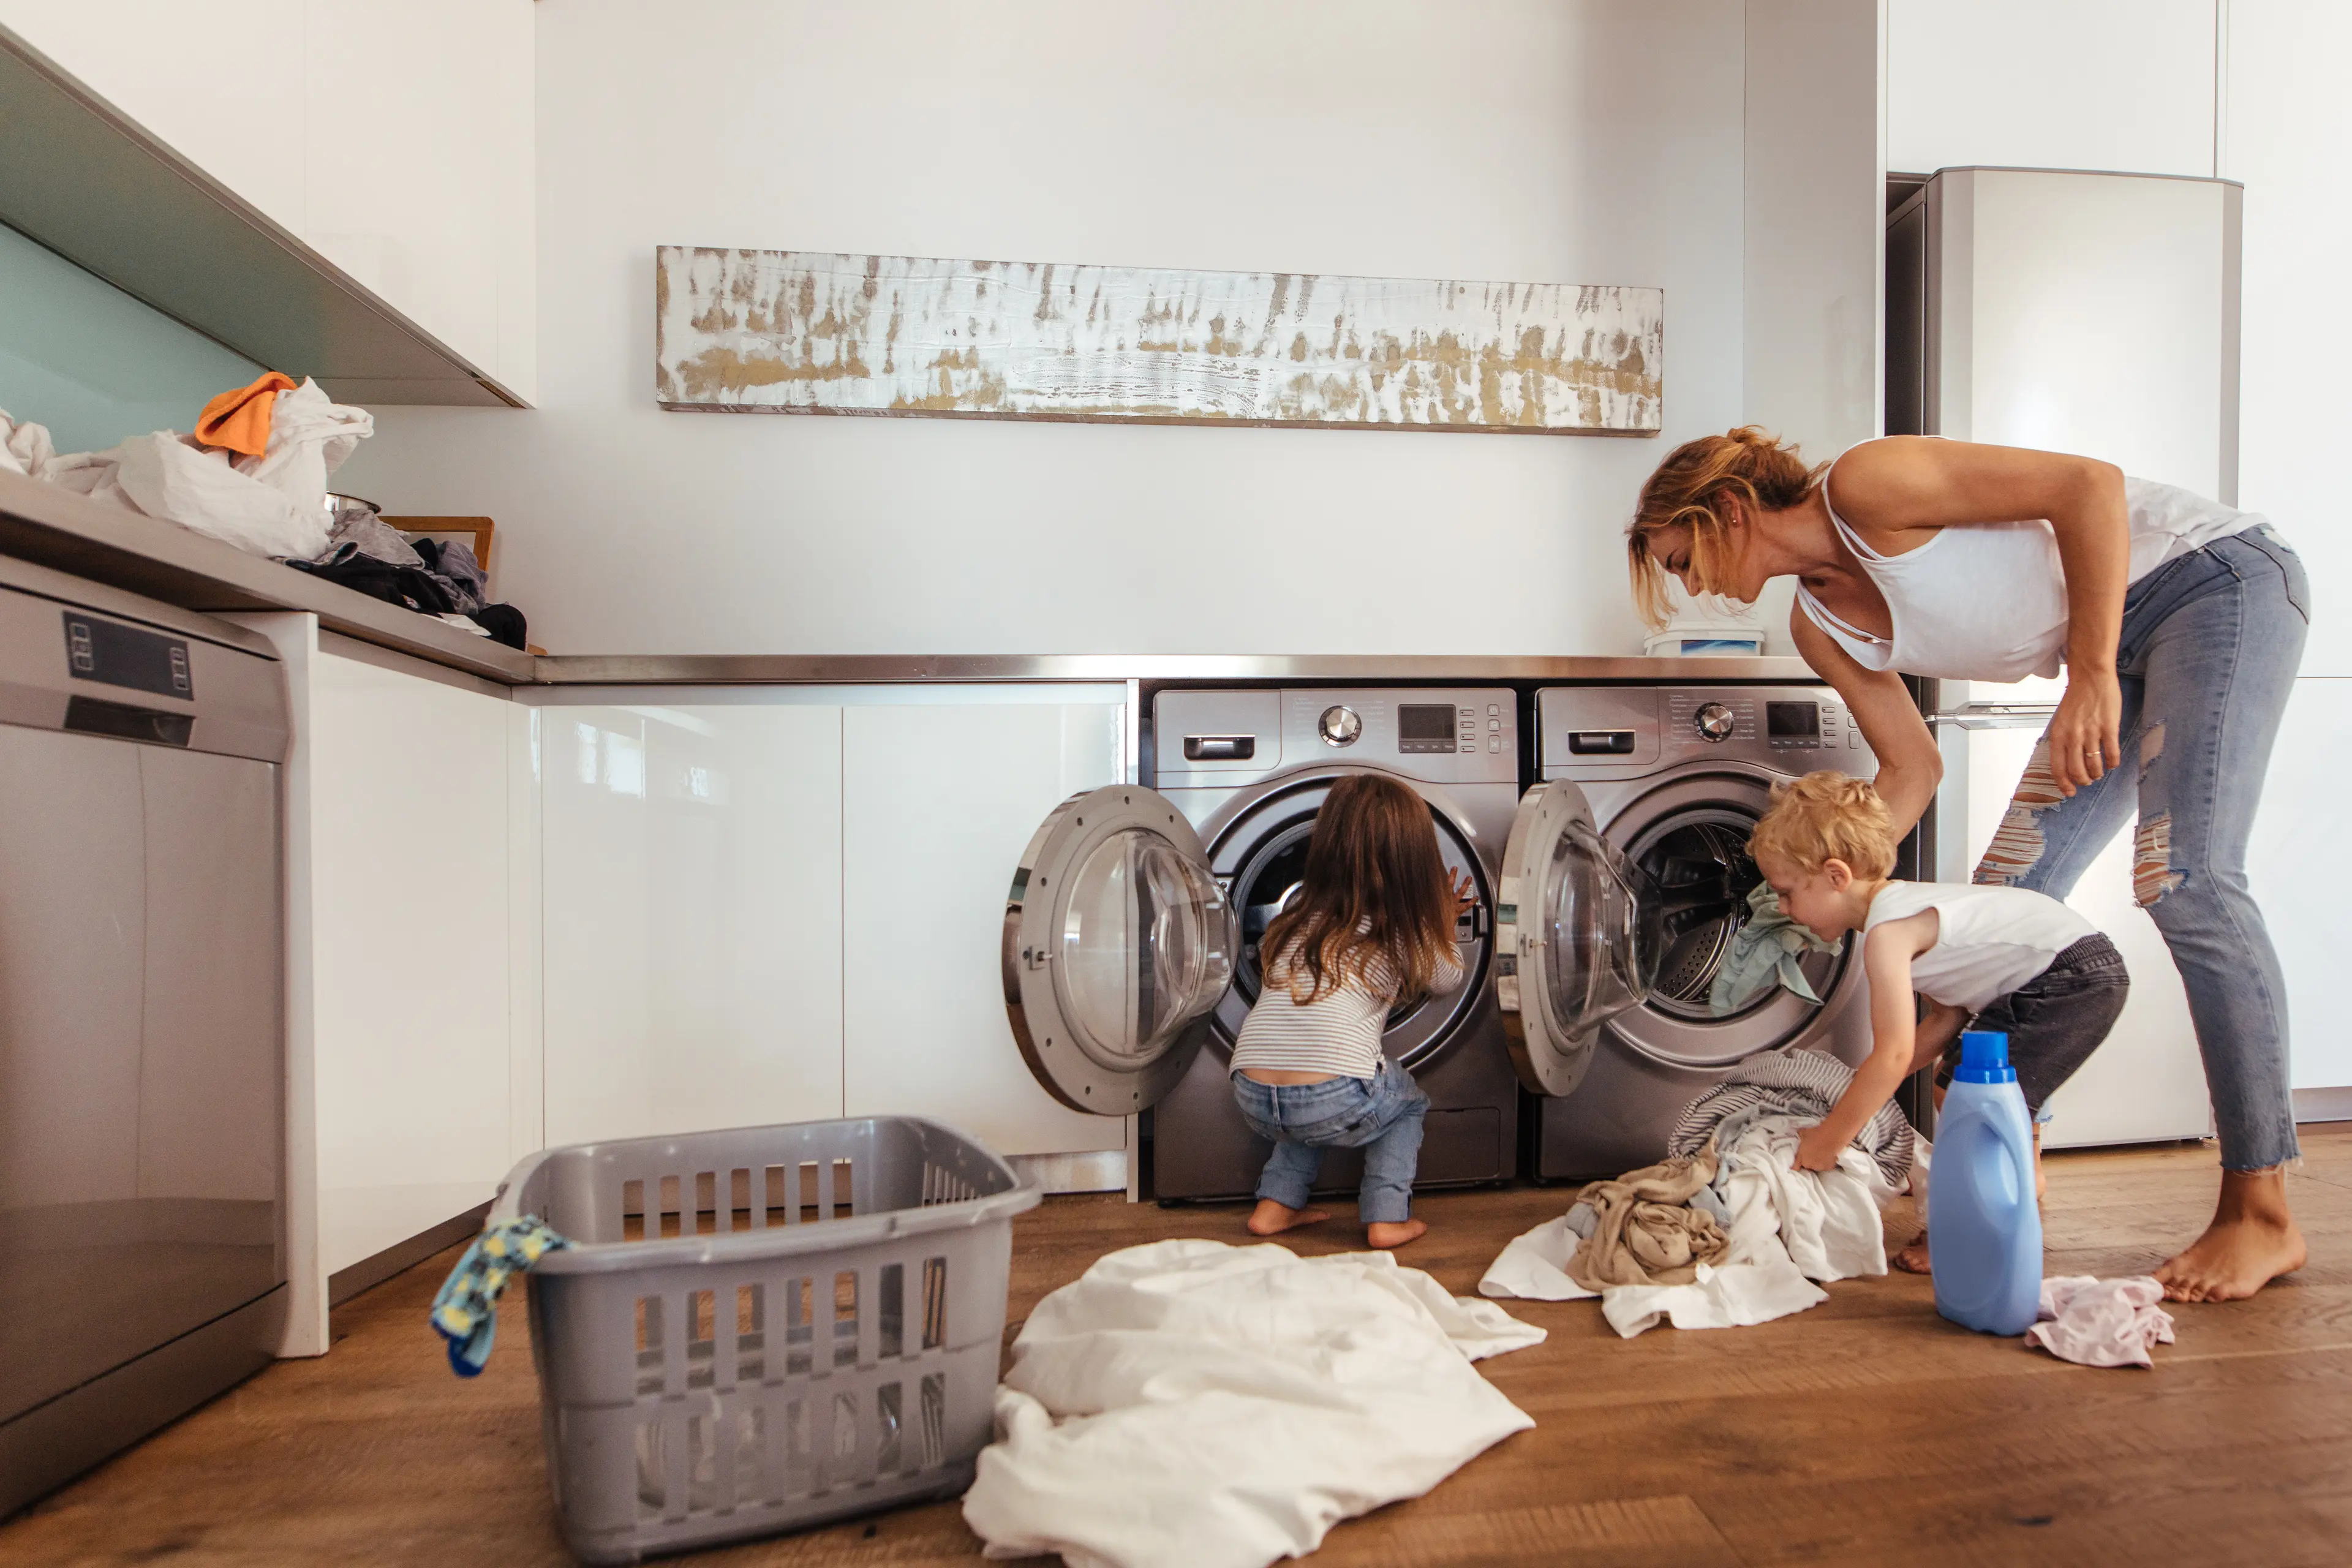 A woman and two kids happily do laundry together. The woman smiles while teaching the kids, who eagerly help. The scene captures how Acima Leasing can help customers get the appliances they need.